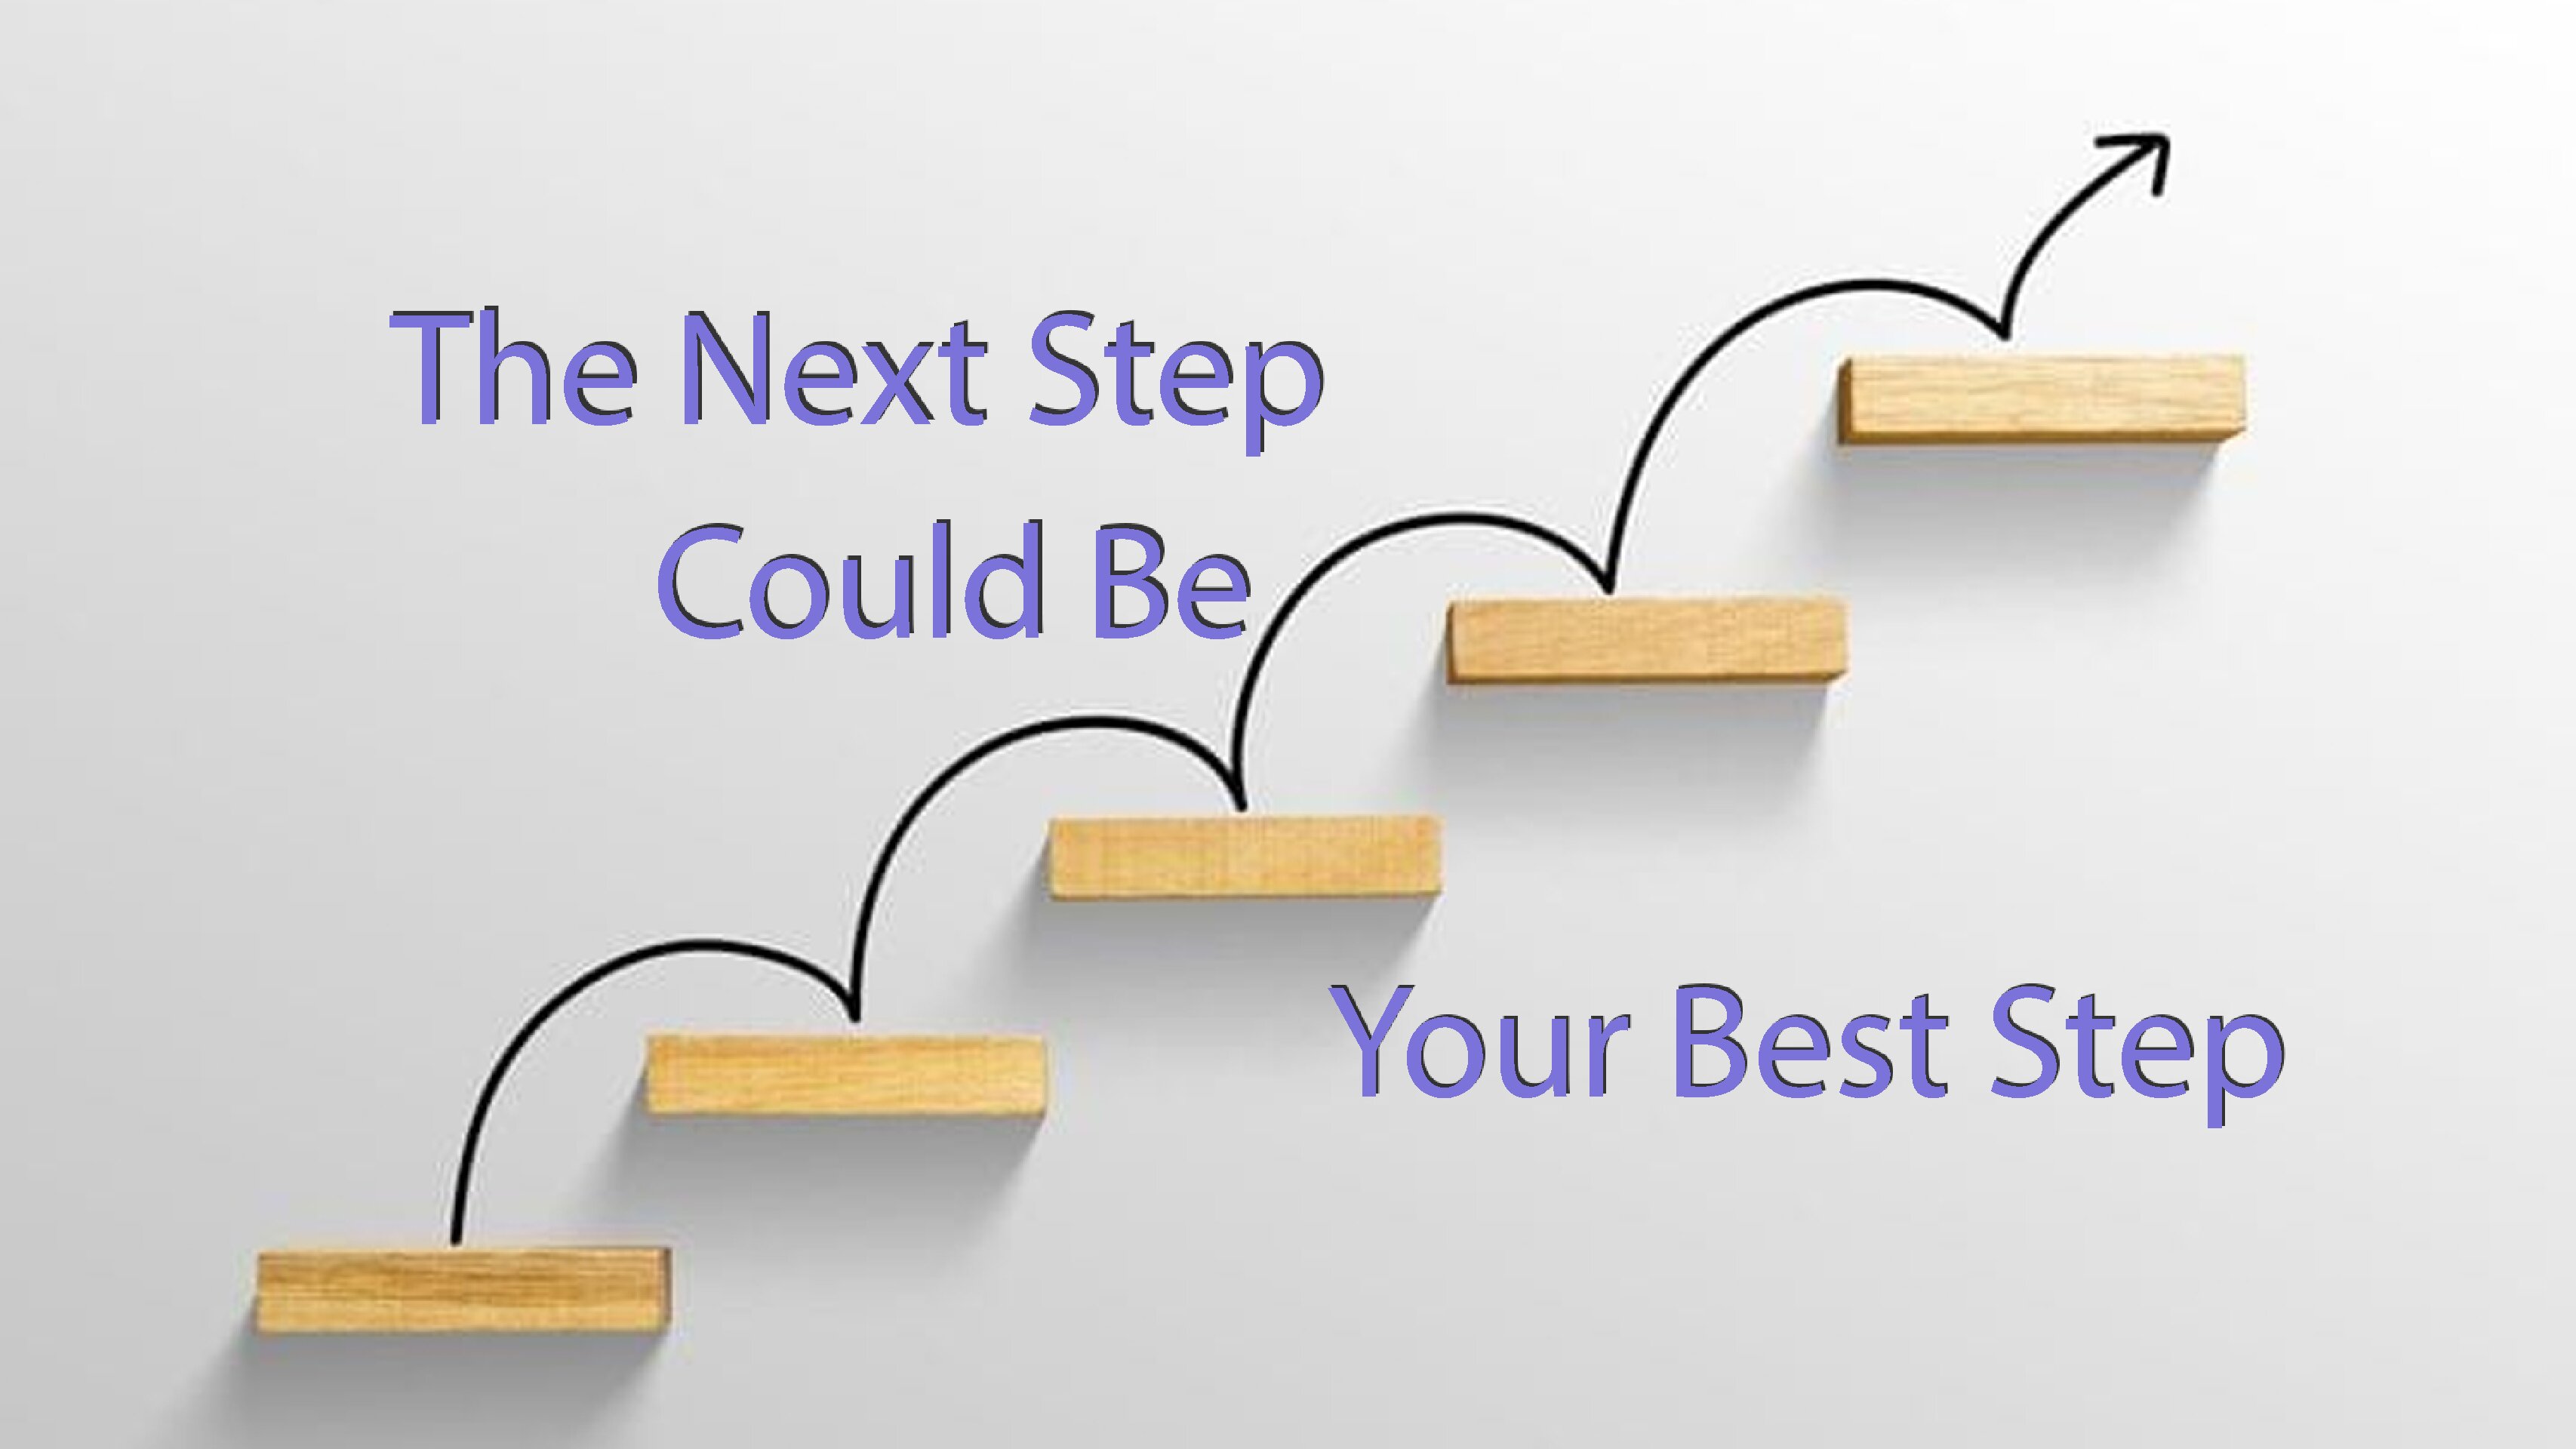 The Next Step Could Be Your Best Step